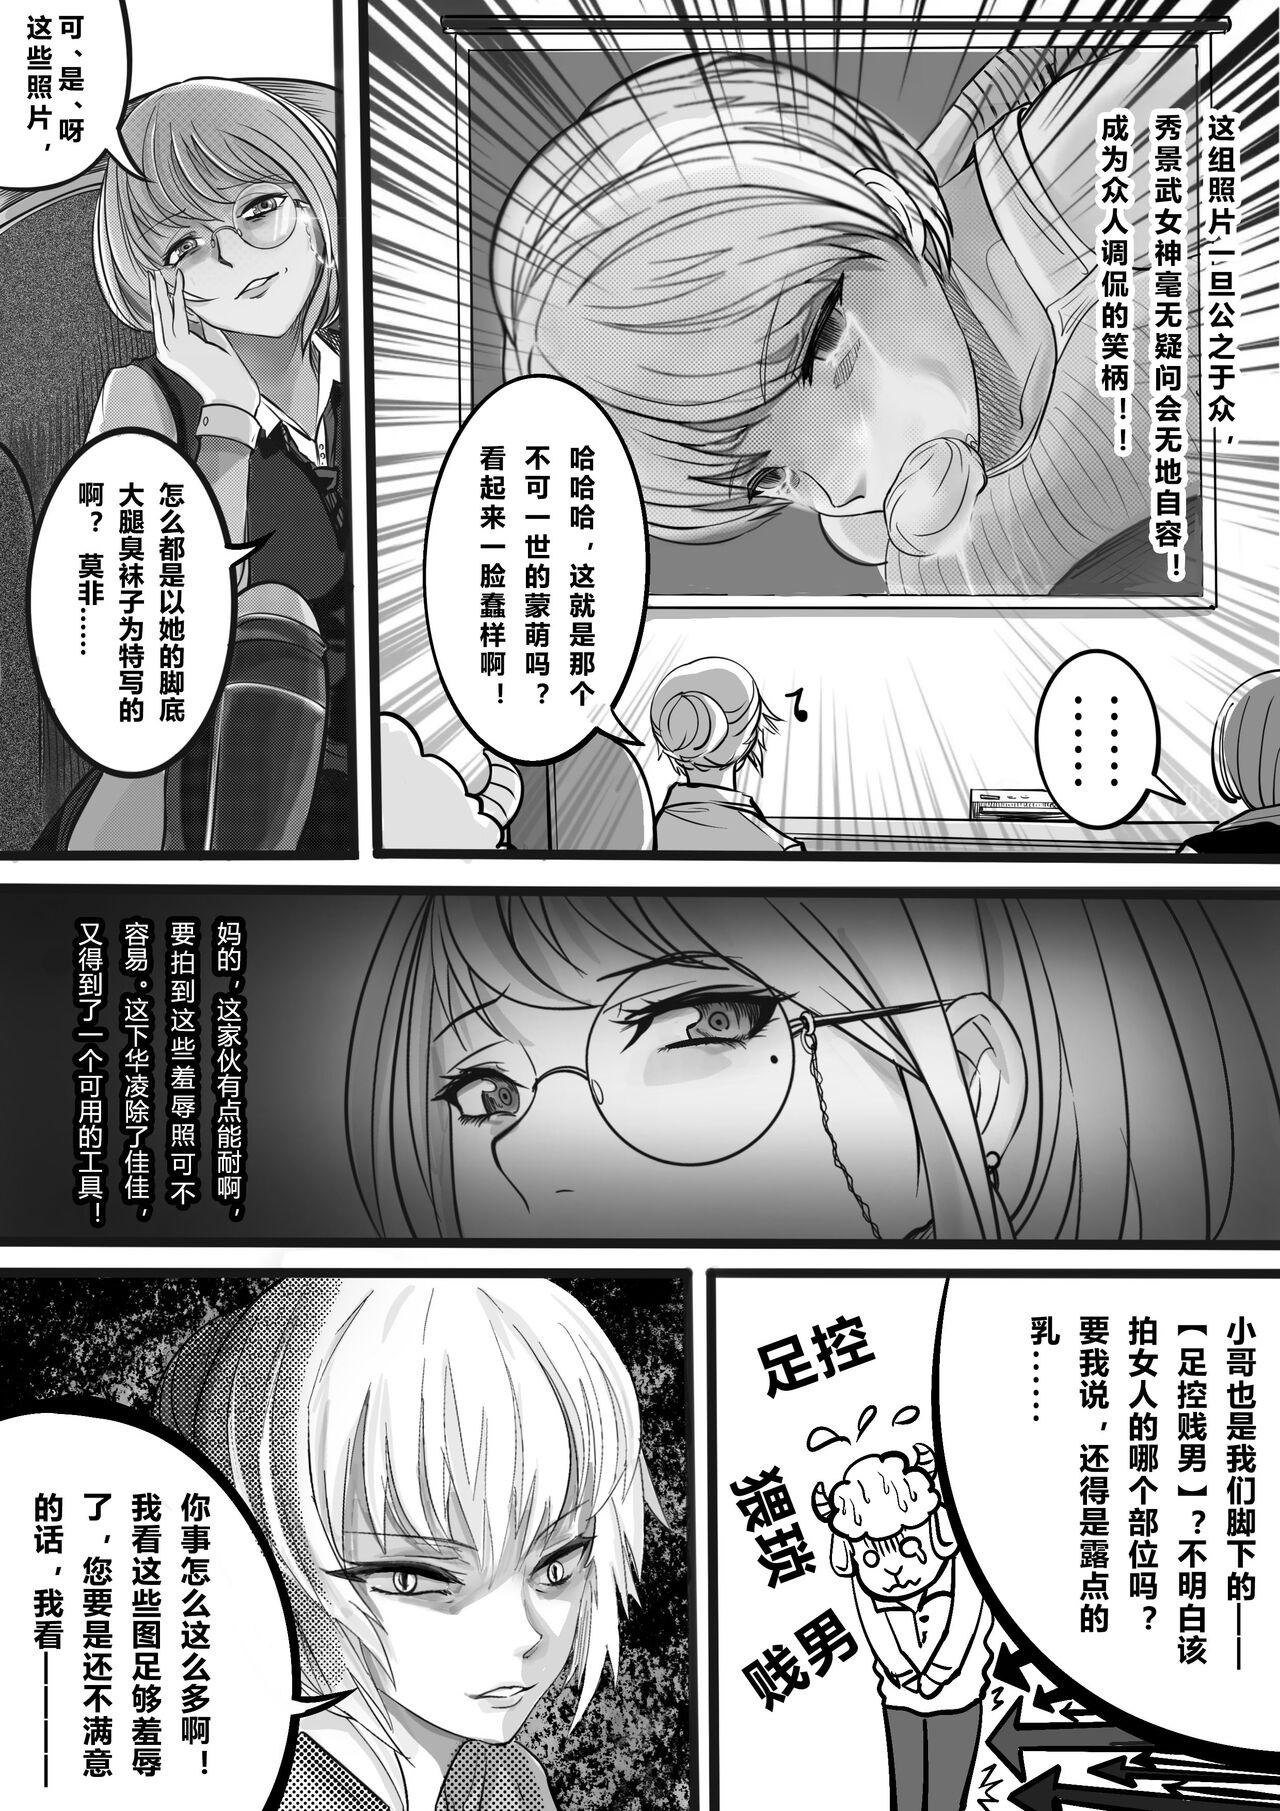 Private Sex GOAT-goat Ⅲ special chapter - Original Lima - Page 6